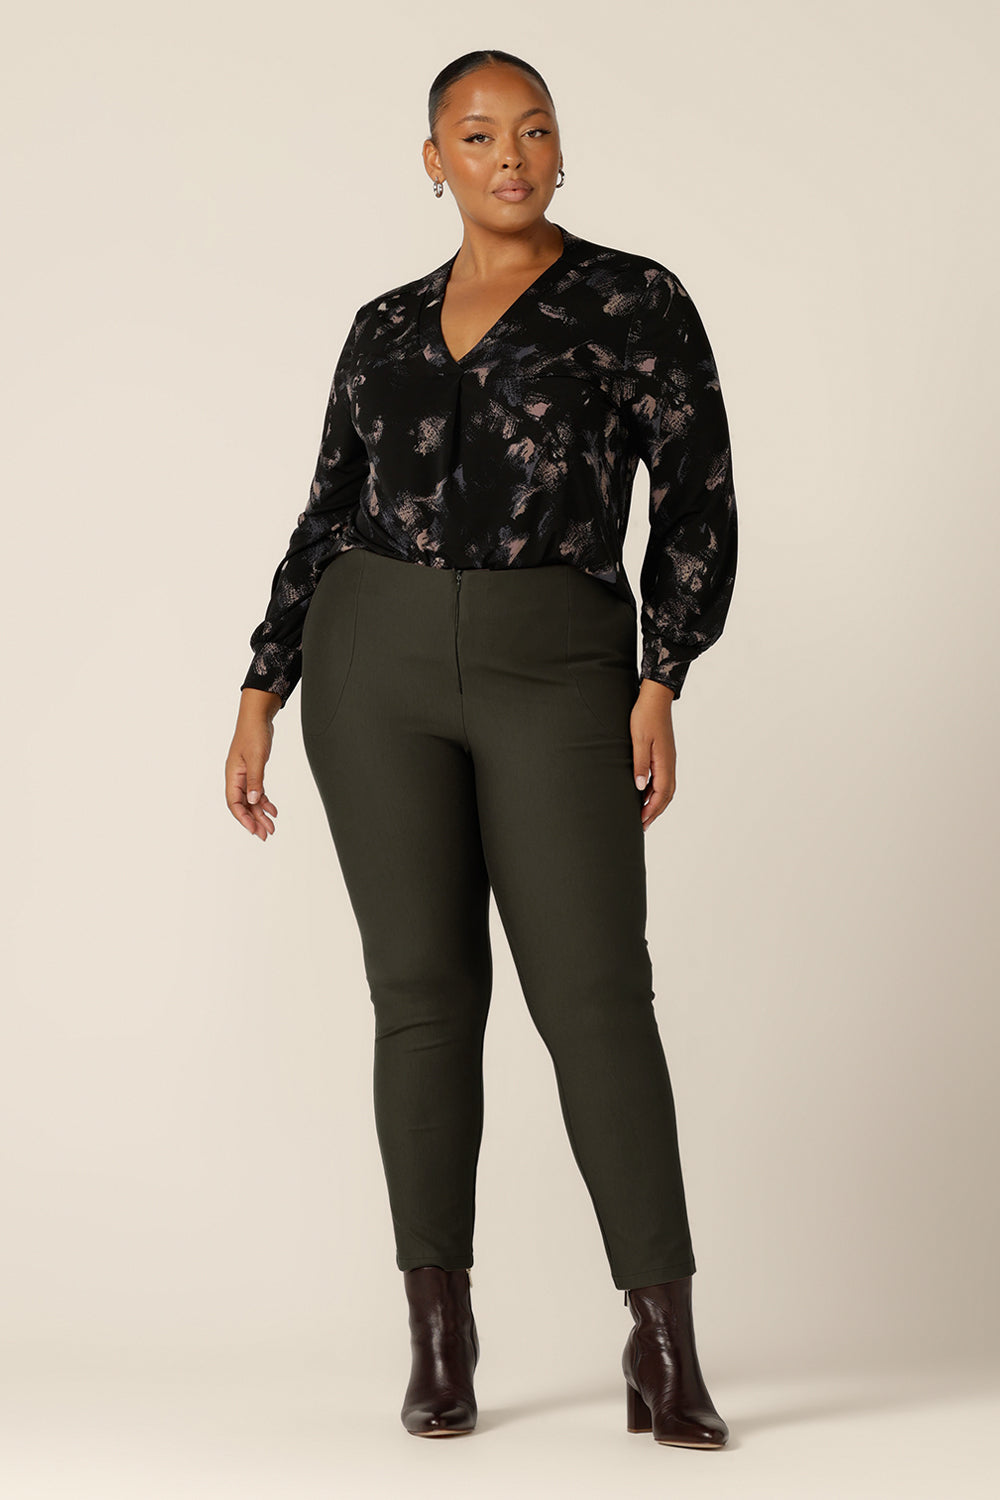 A plus size, size 18 woman wearing a long sleeve, V-neck top in printed black jersey with slim-leg, olive green pants. Made in Australia by Australian and New Zealand women's clothing label, L&F, this comfortable top is good for work and casual wear.